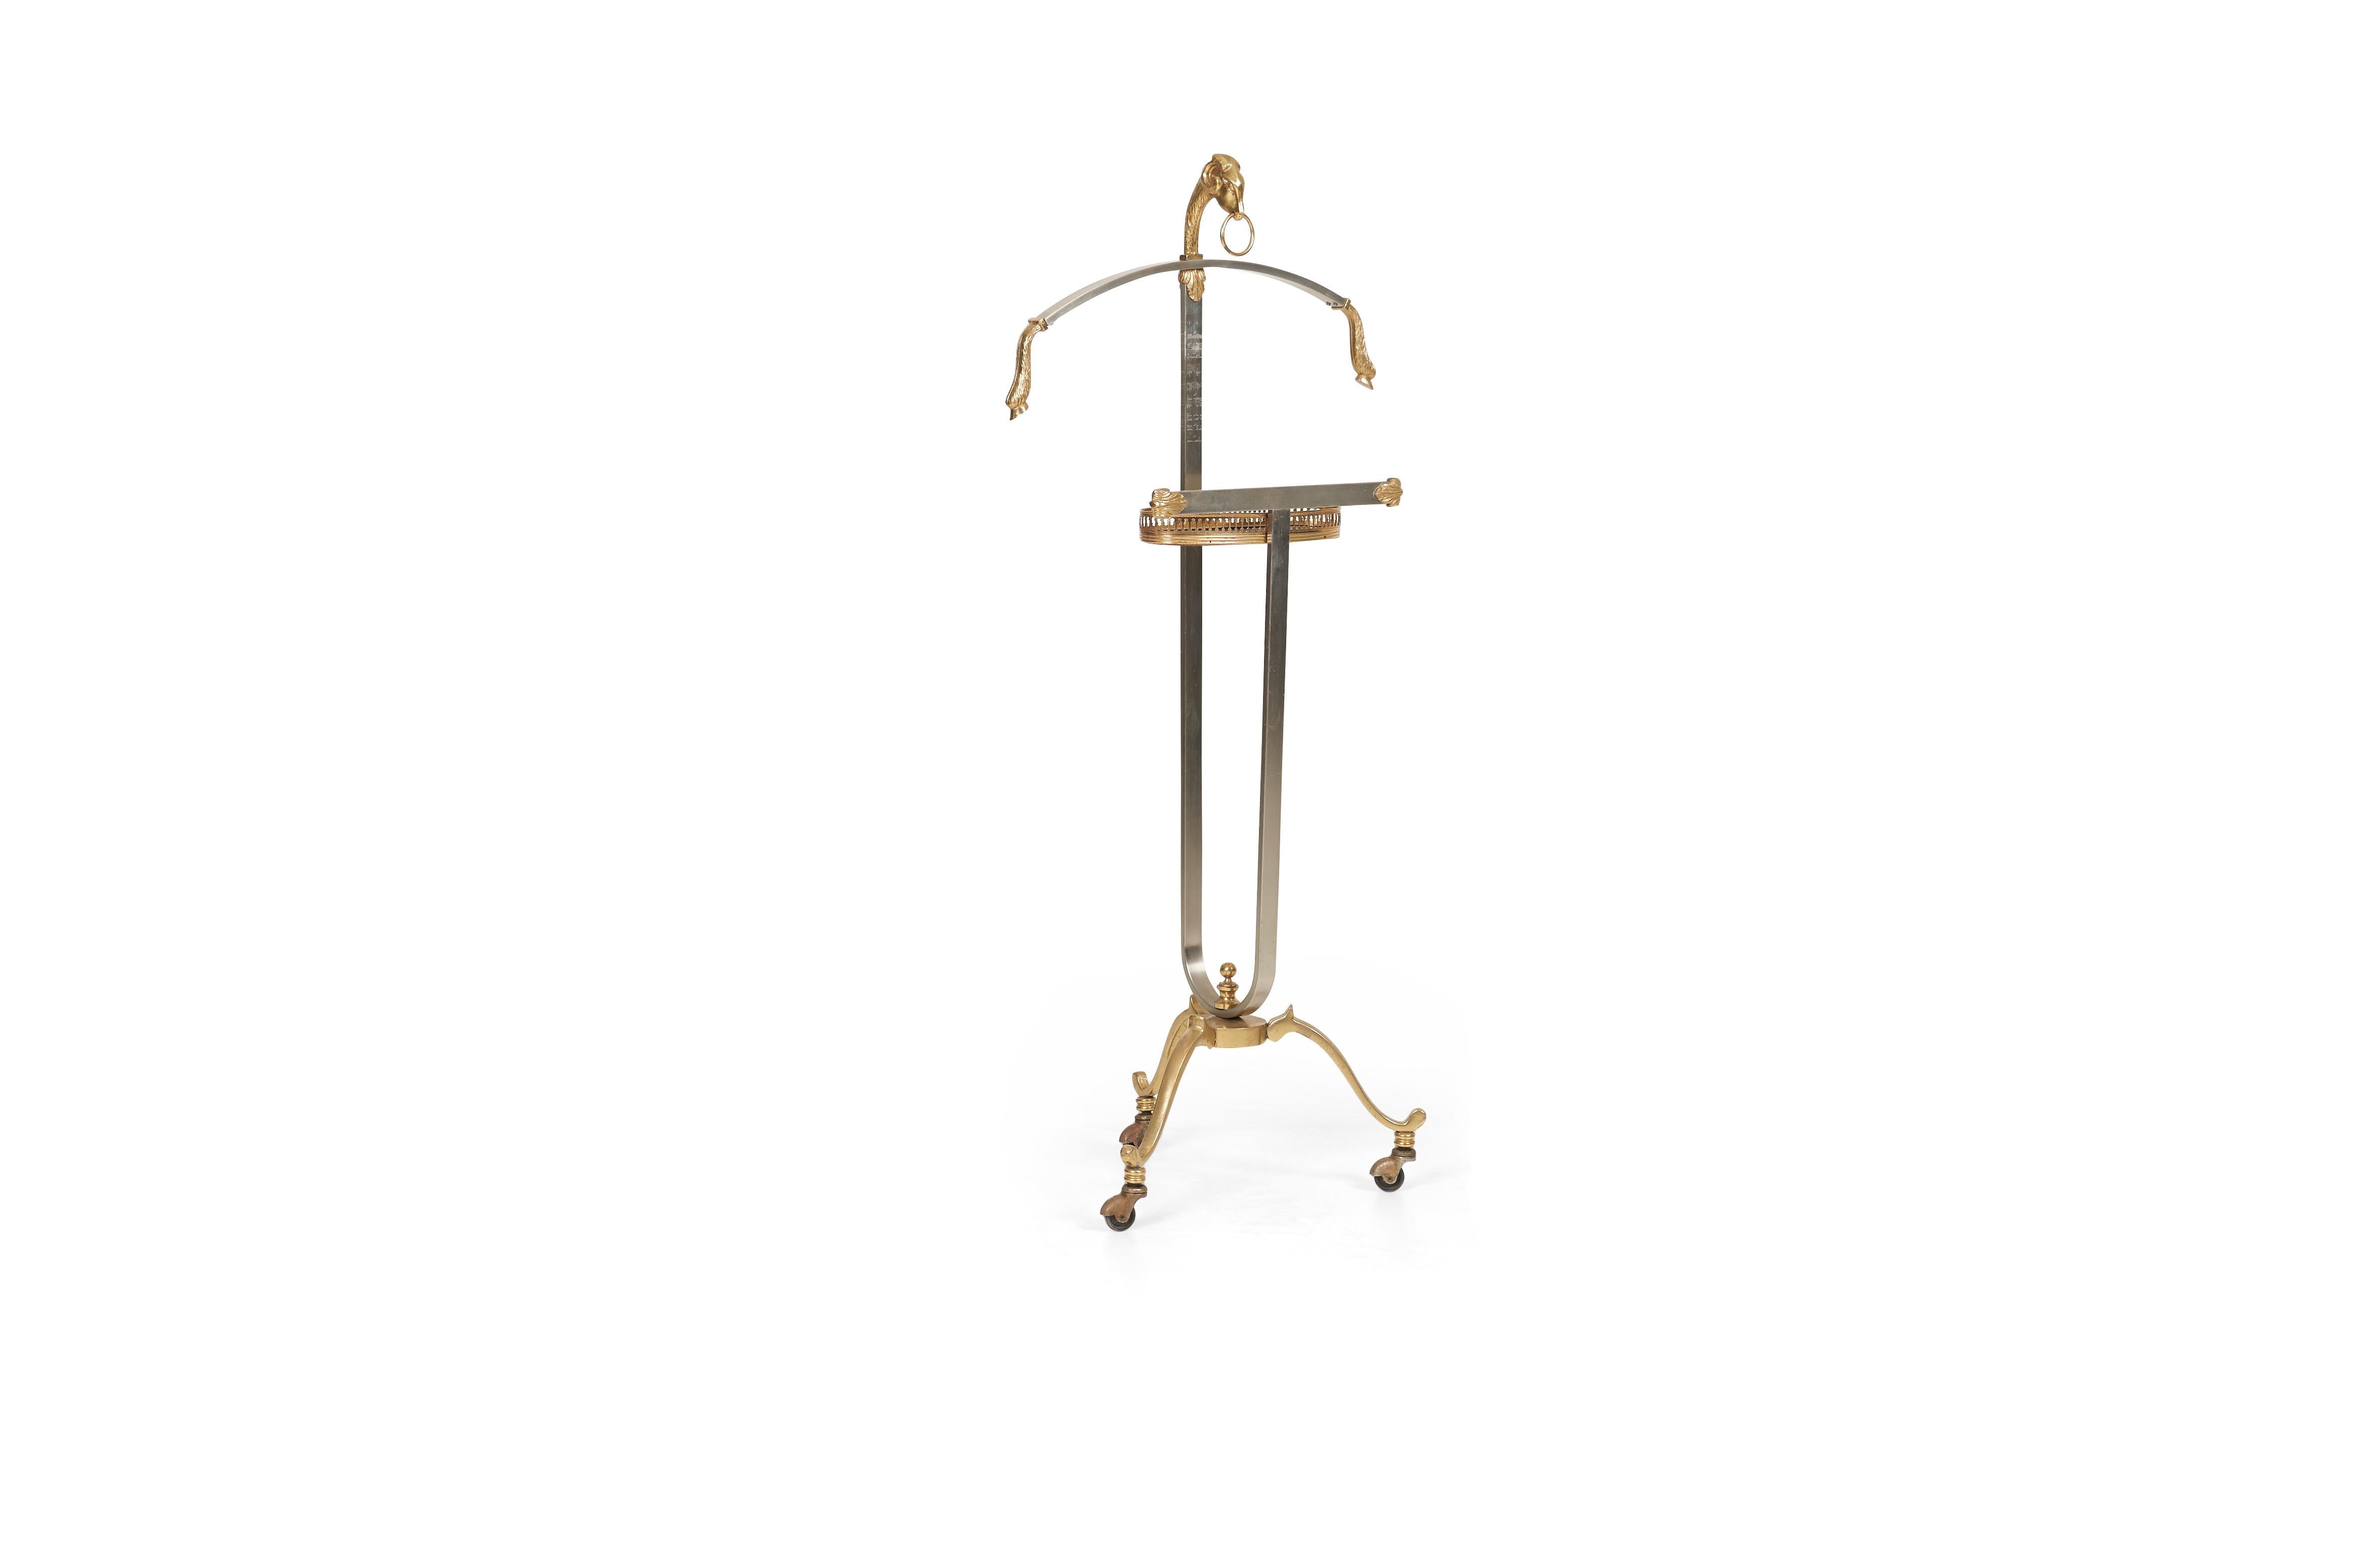 Maison Jansen (French, founded 1880) Ram's head valet, circa 1960. Italian, brass and brushed stainless steel, curved jacket bar with brass hooves, adjustable stem, galley rail tray, terminating on tripod base with casters.
(Stamped made in Italy).